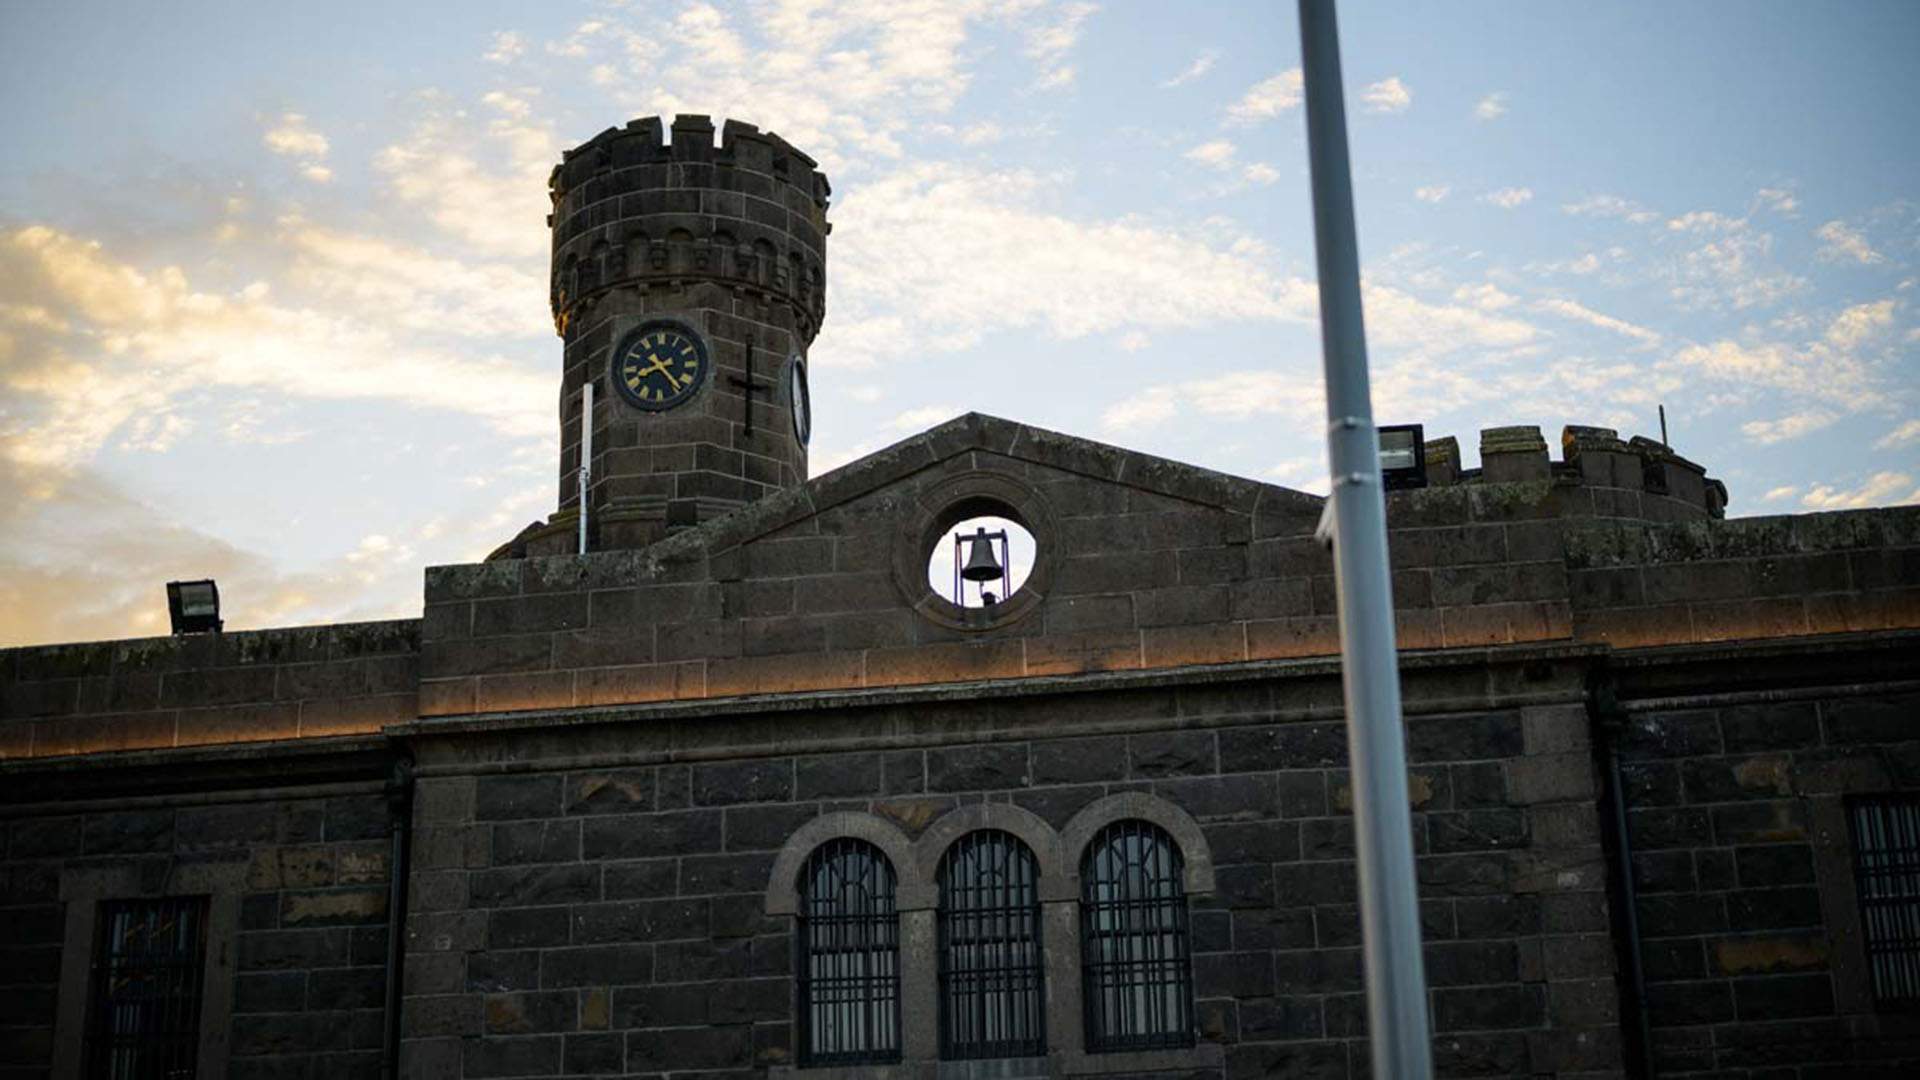 Pentridge's Openair Cinema Is Back for Another Season with a Packed Lineup of New and Classic Flicks 